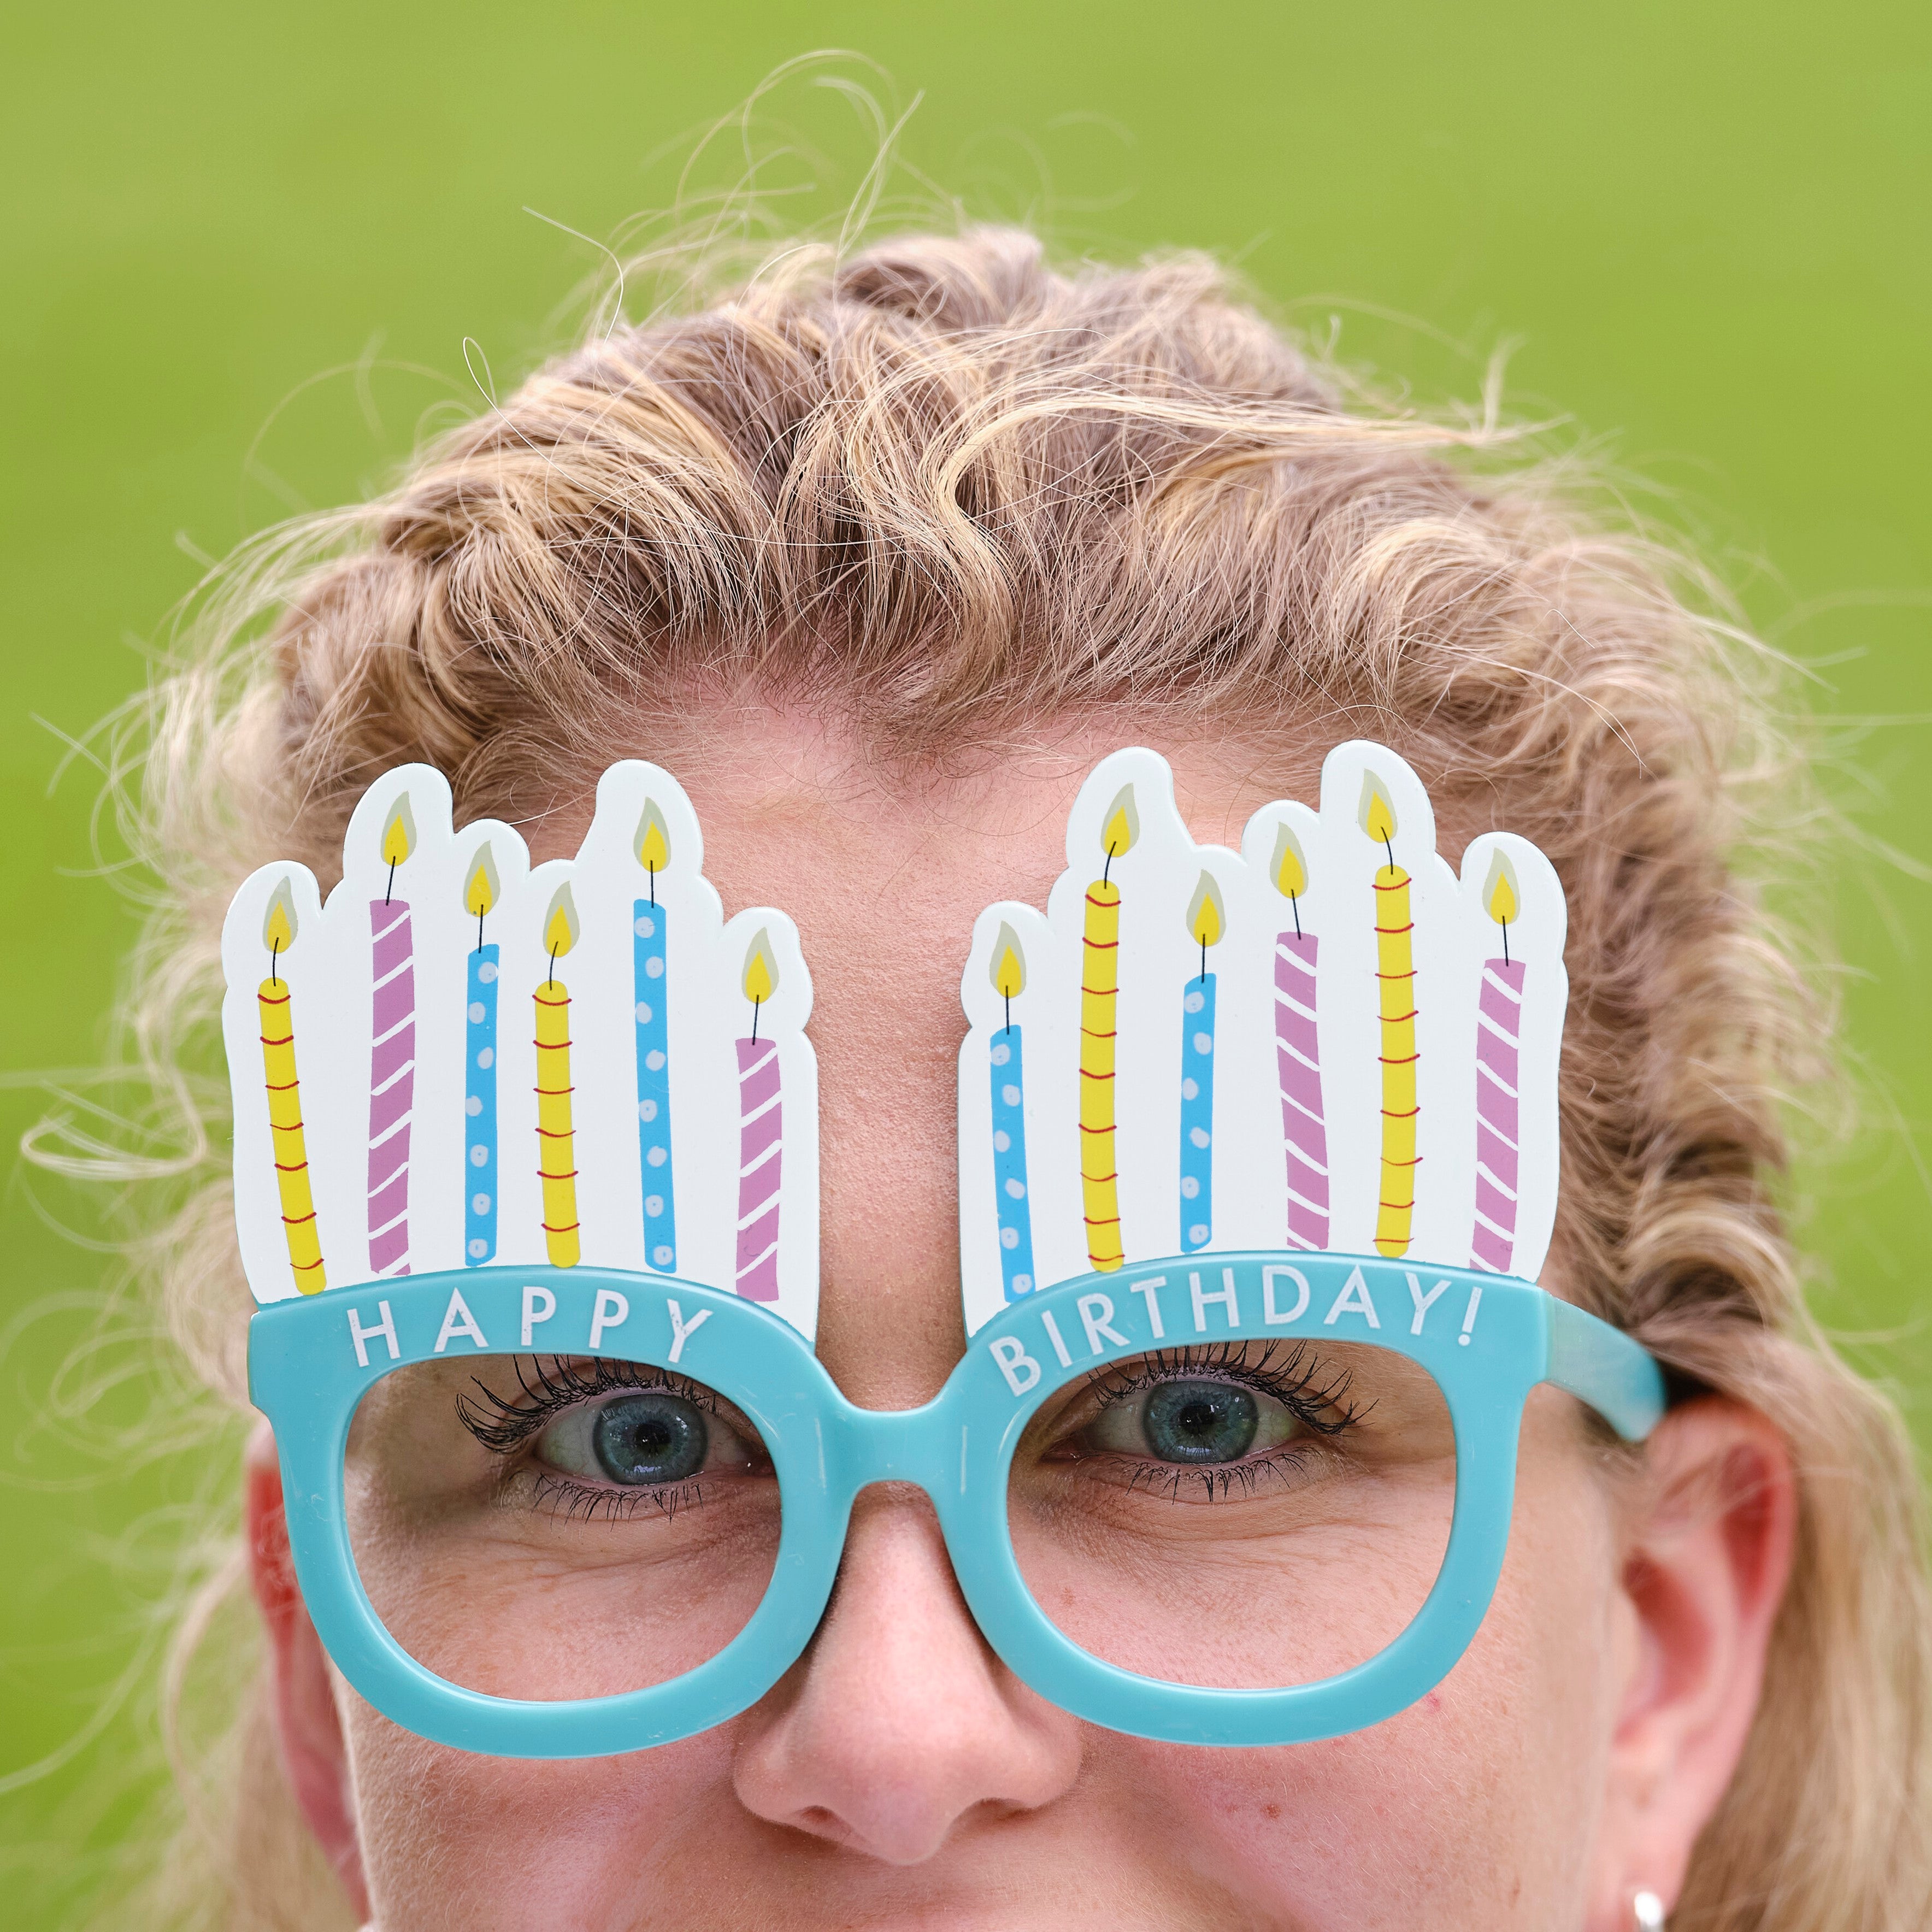 Funny birthday glasses with colorful candles